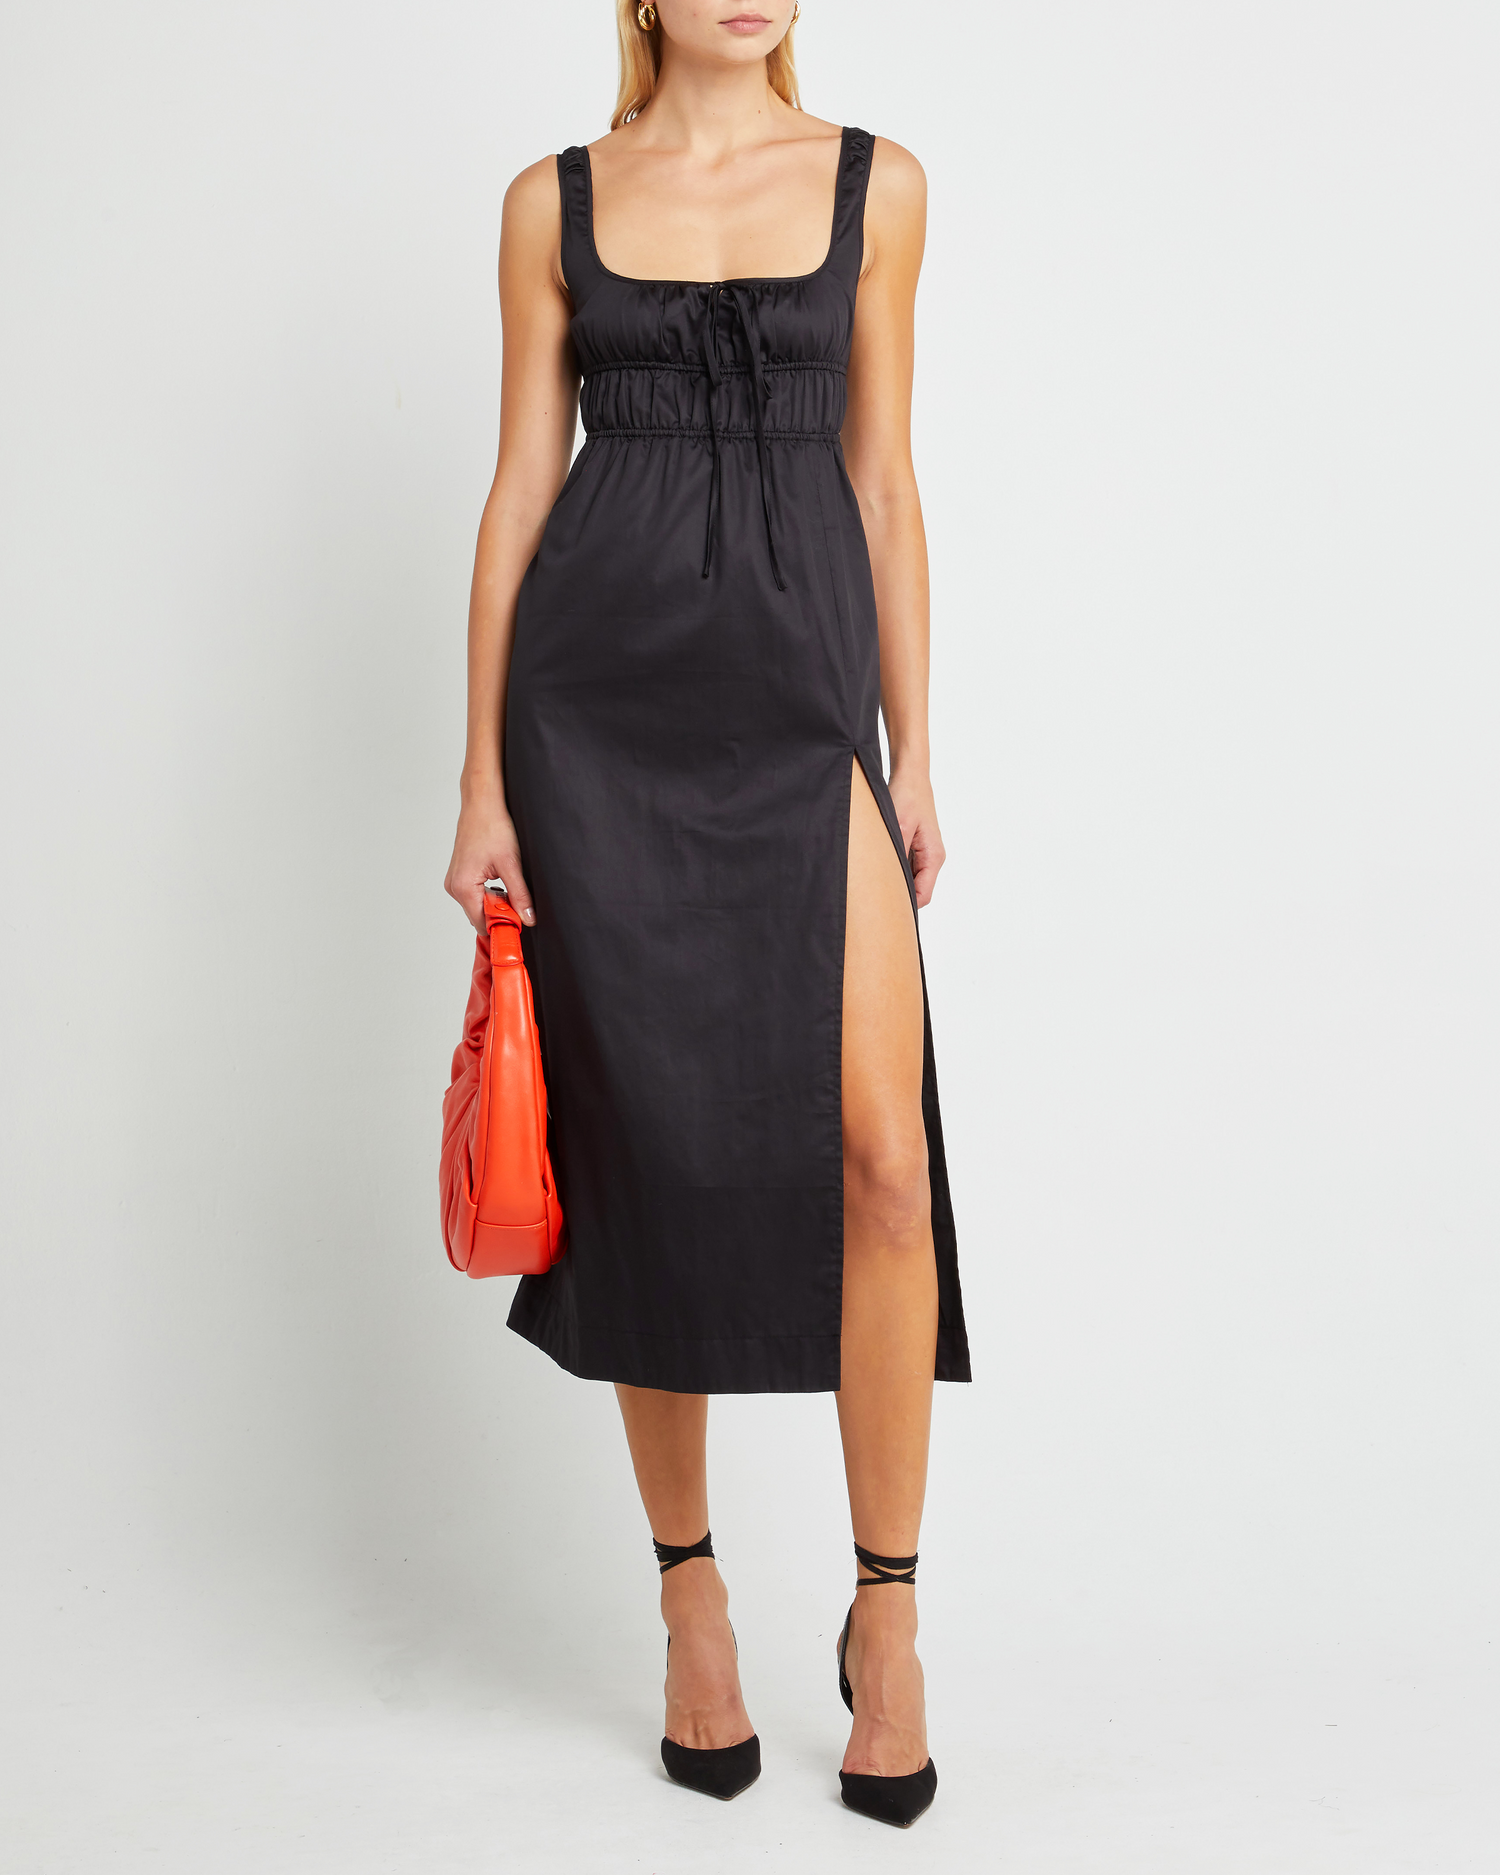 Fourth image of Moira Dress, a black midi dress, tie, side slit, gathering, fitted, empire waist